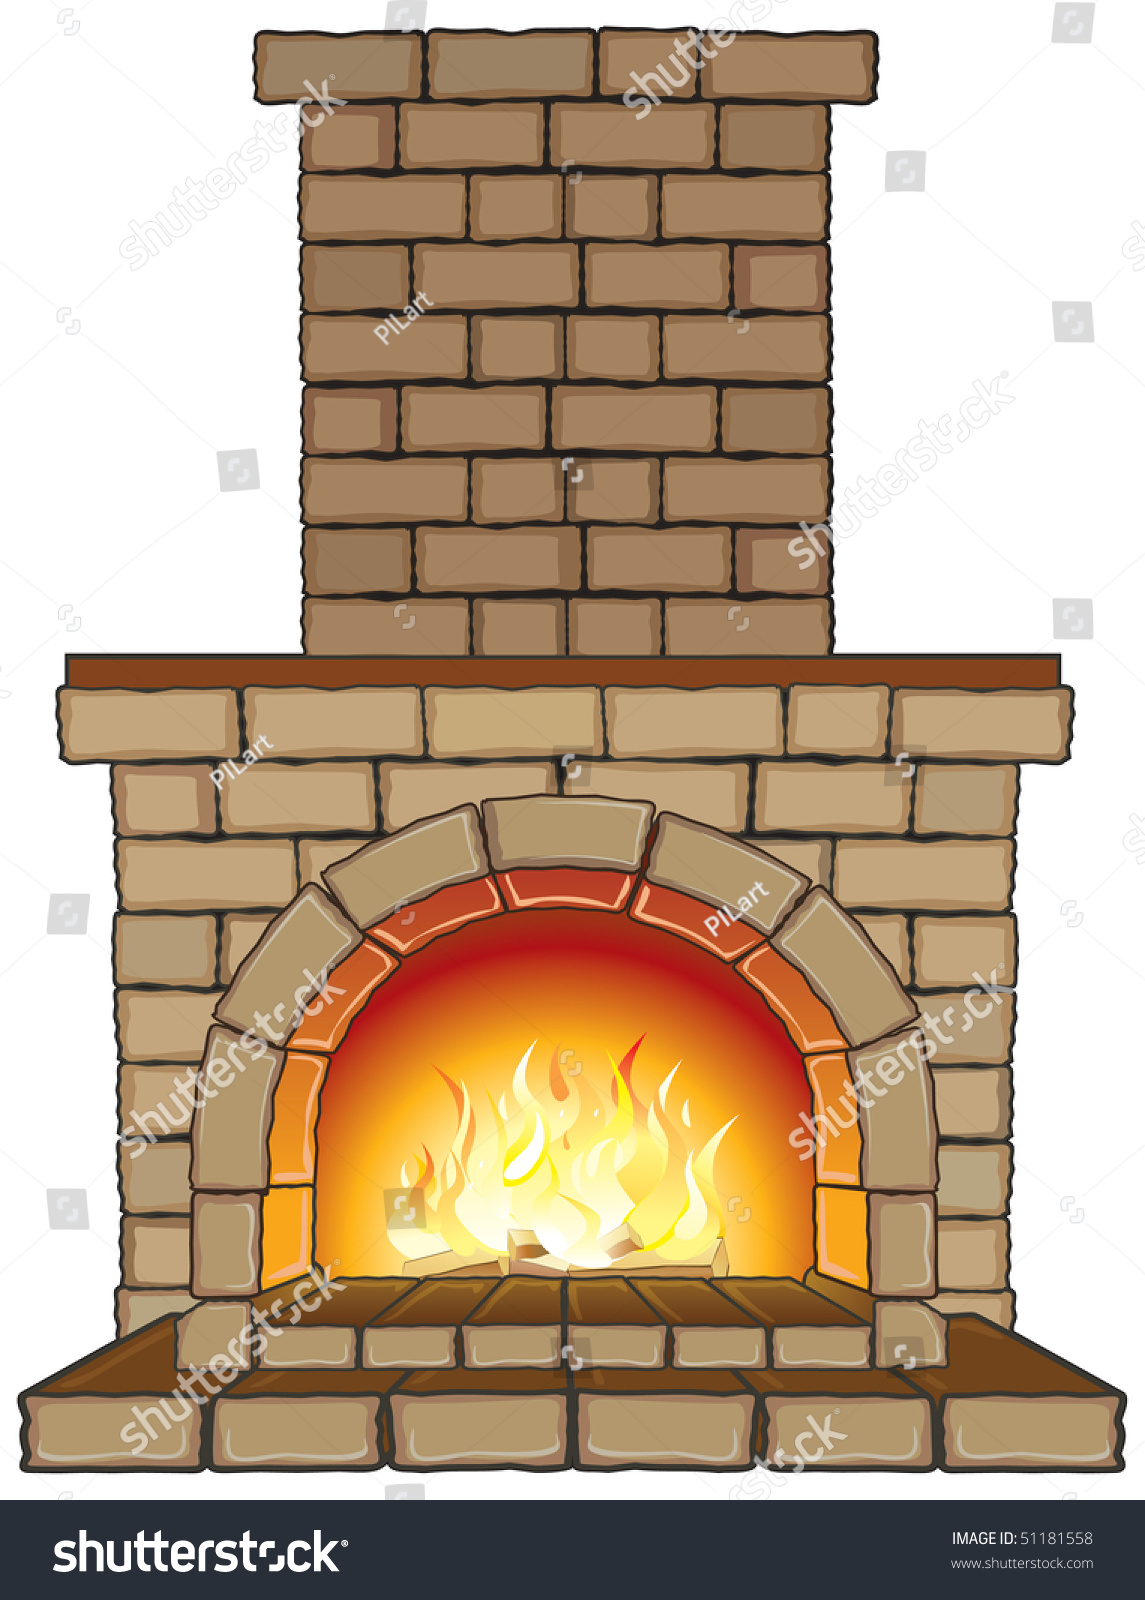 clipart fireplace fire - photo #23